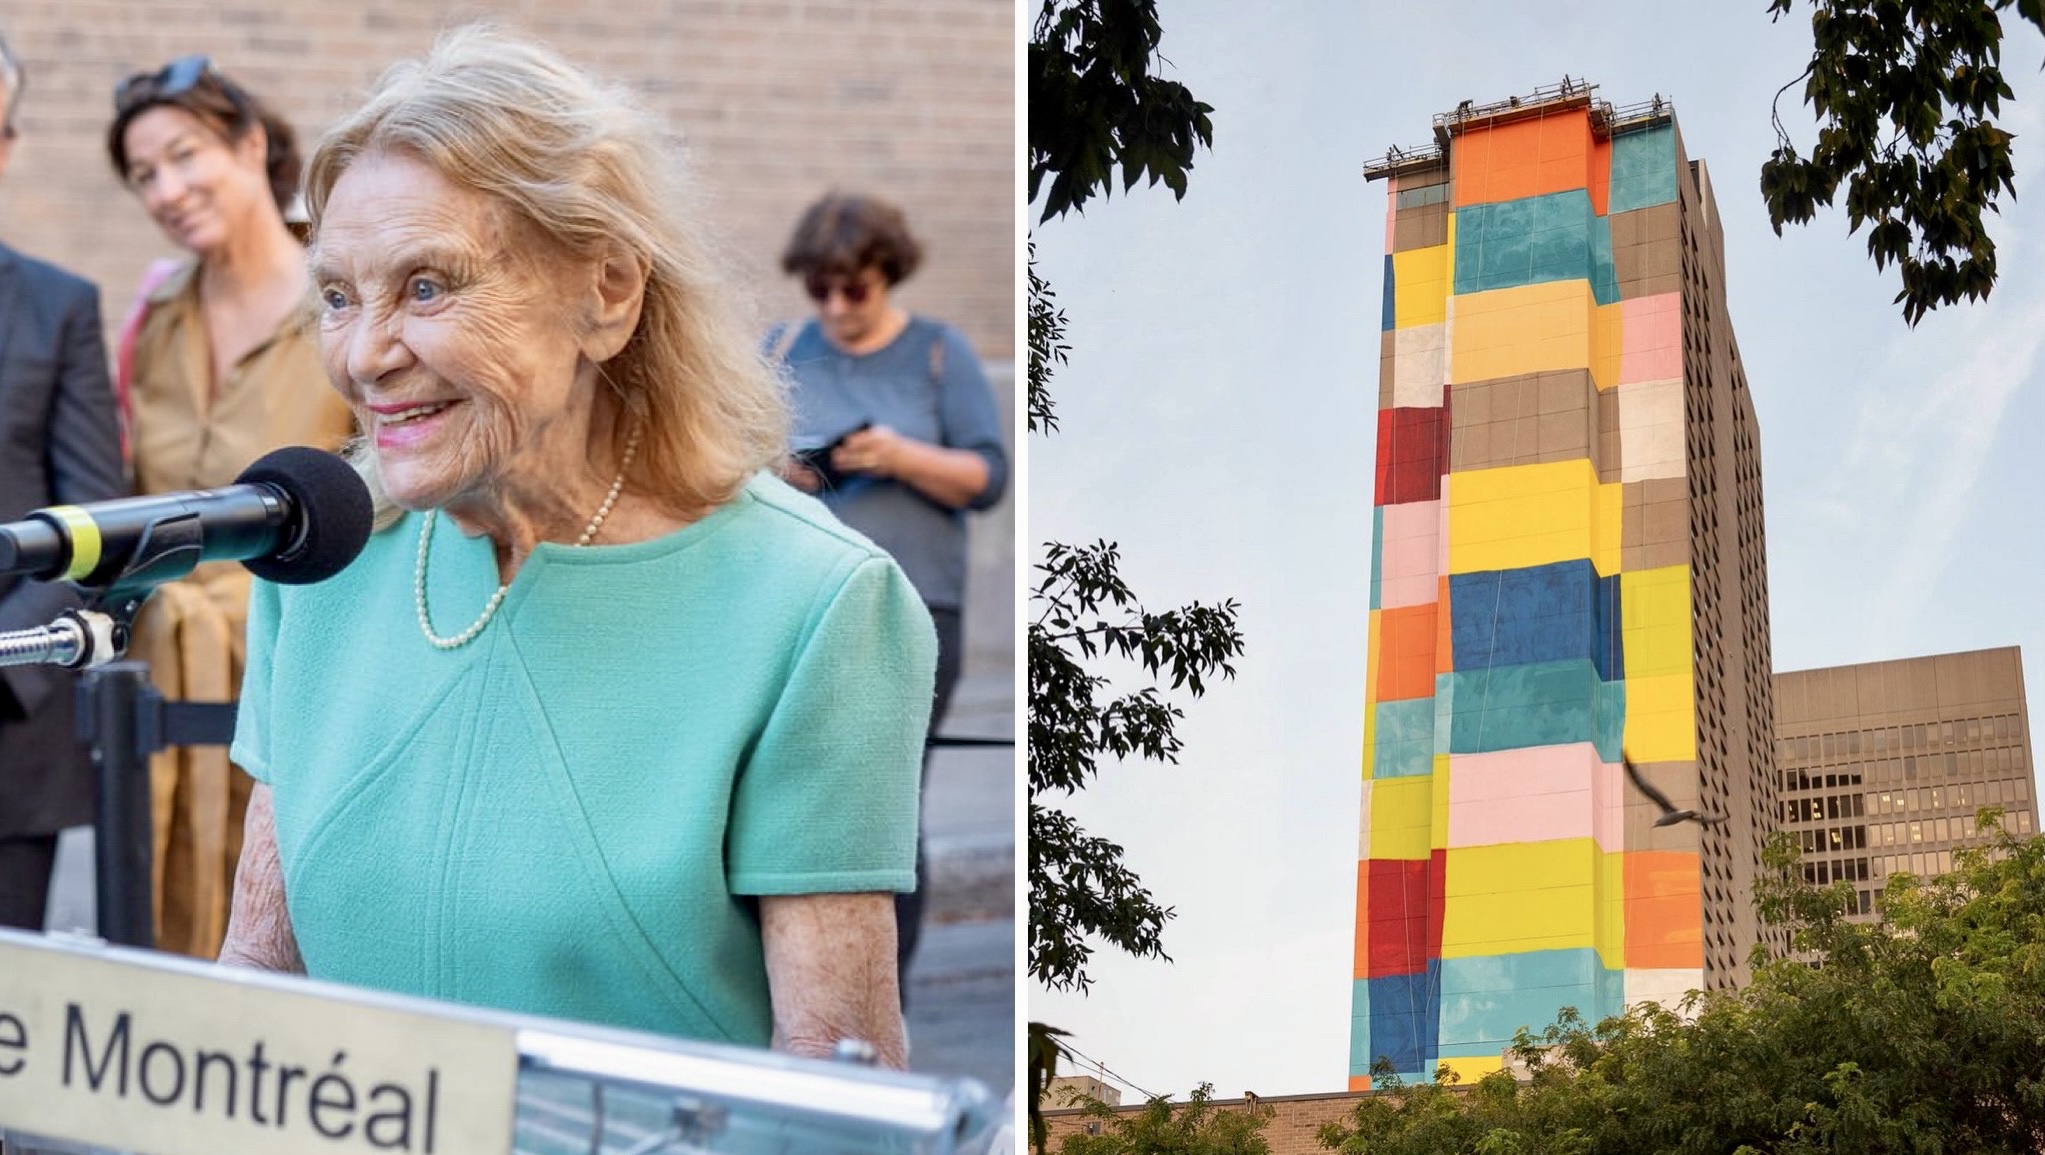 City salutes Quebec artist Françoise Sullivan with largest mural in Montreal